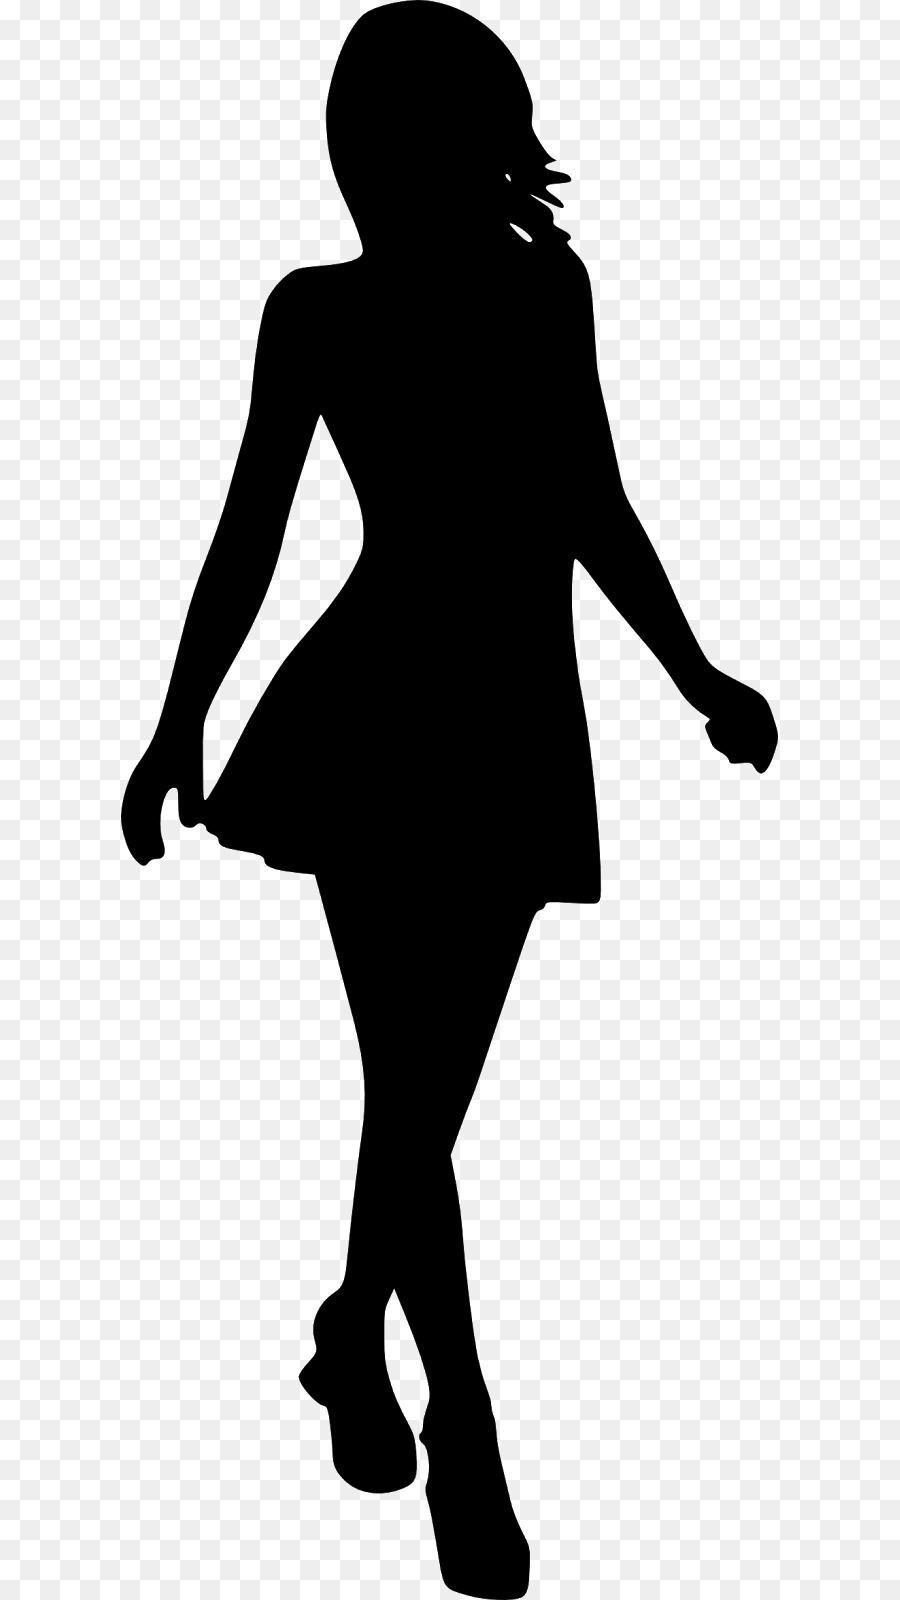 Silhouette Woman Clip art - woman silhouette png download - 1210*1920